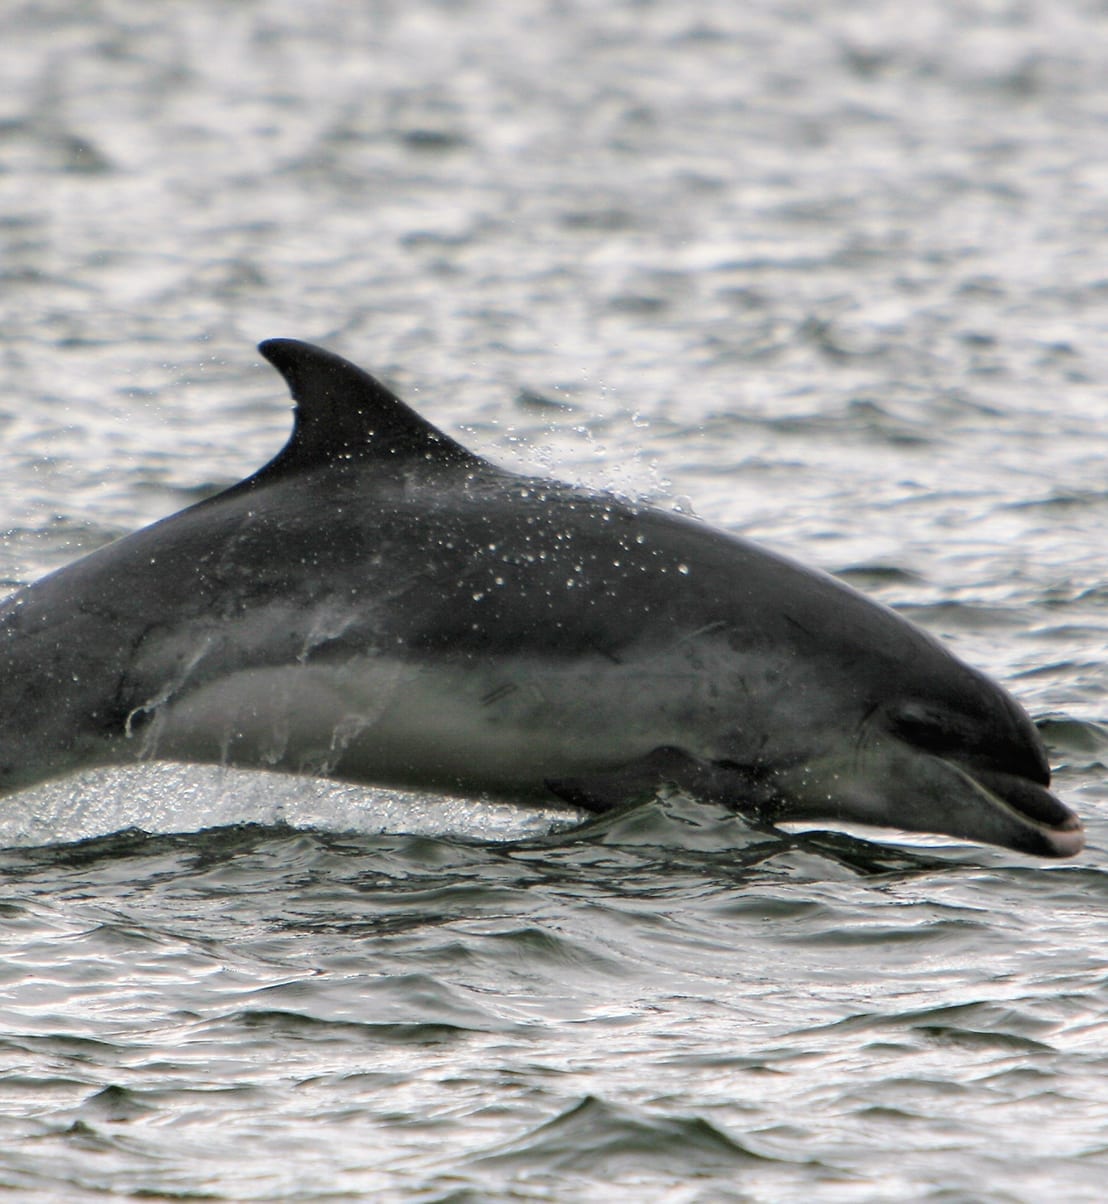 Adopt a Dolphin | Irish Whale and